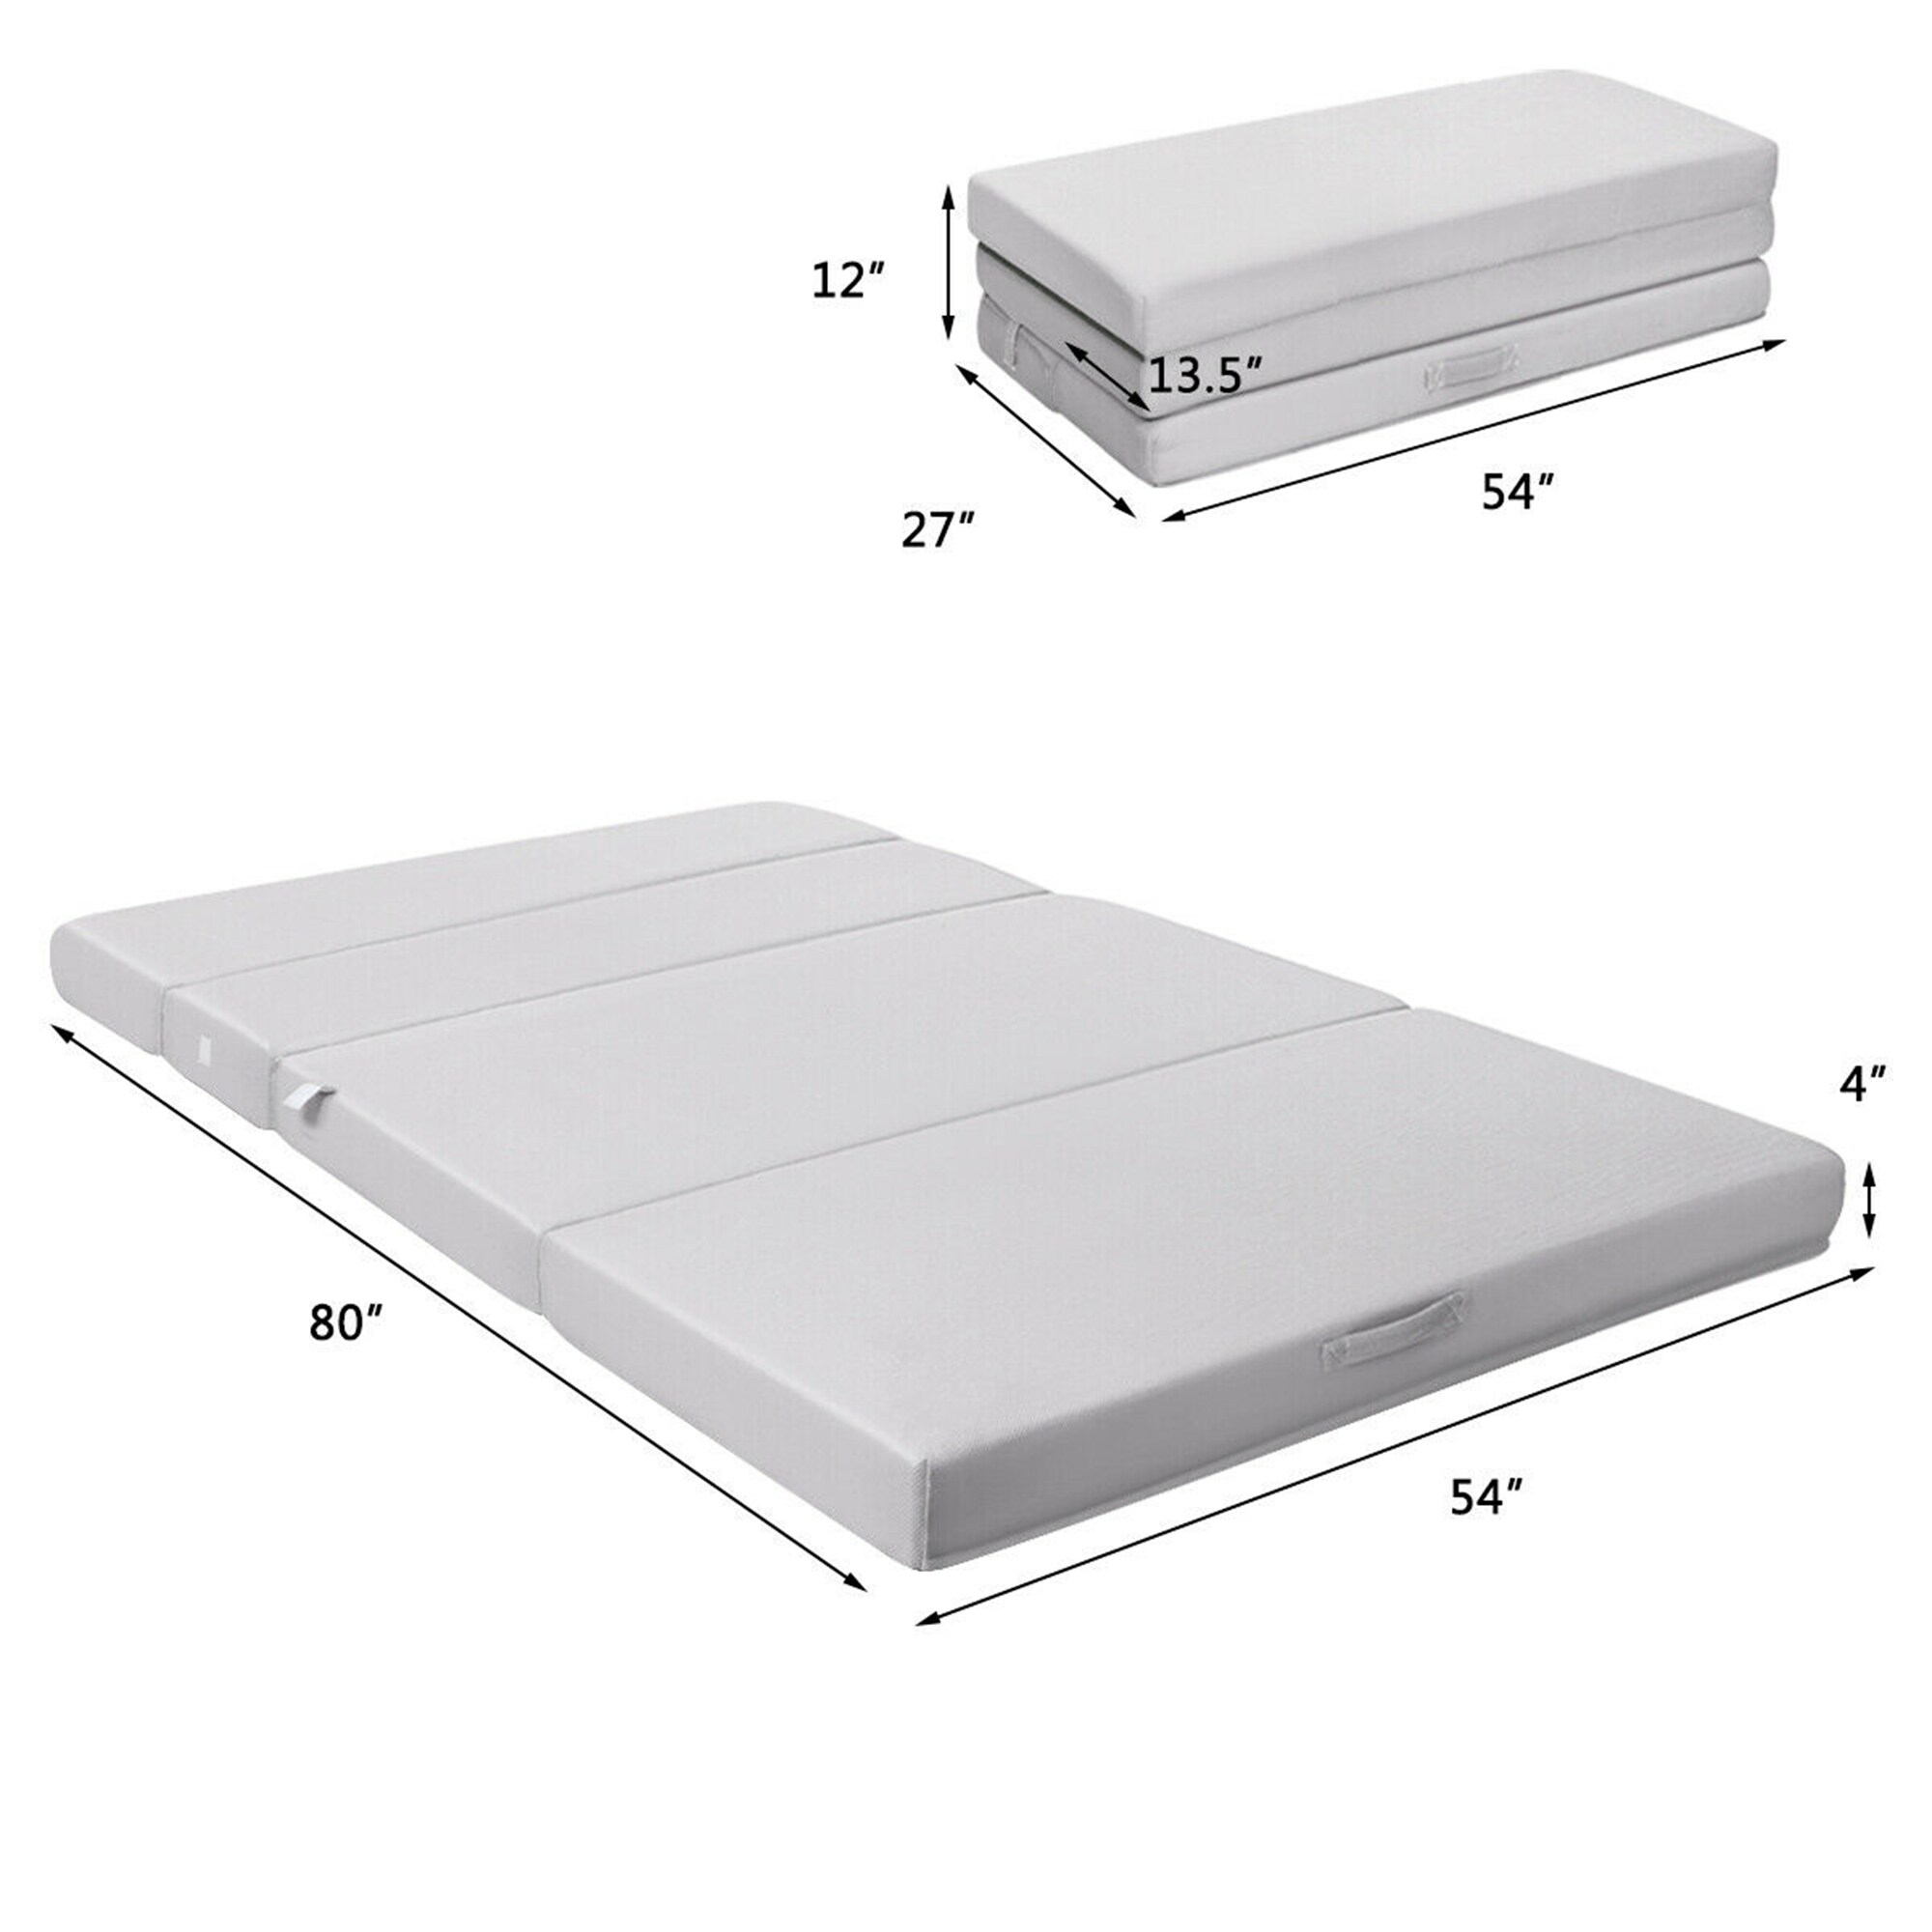 Goplus 4-in Soft Full Folding Mattress in a Box at Lowes.com